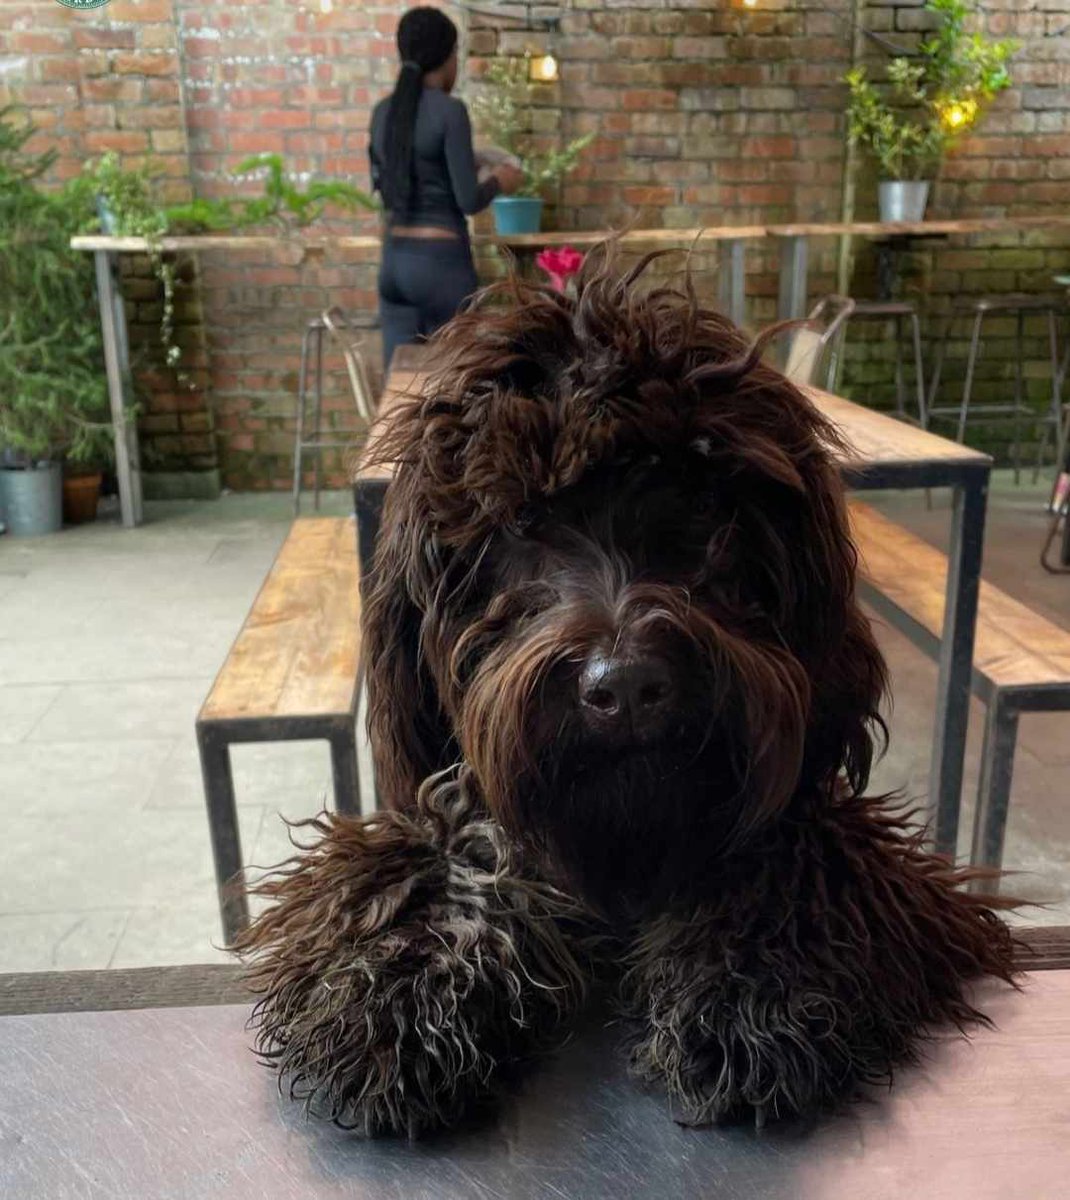 Awwwwww look at this furry face, so adorable! Yes of course you can have a biscuit and a drink of water. #cardiff #cardiffcafe #cardiffdog #cardiffcoffee